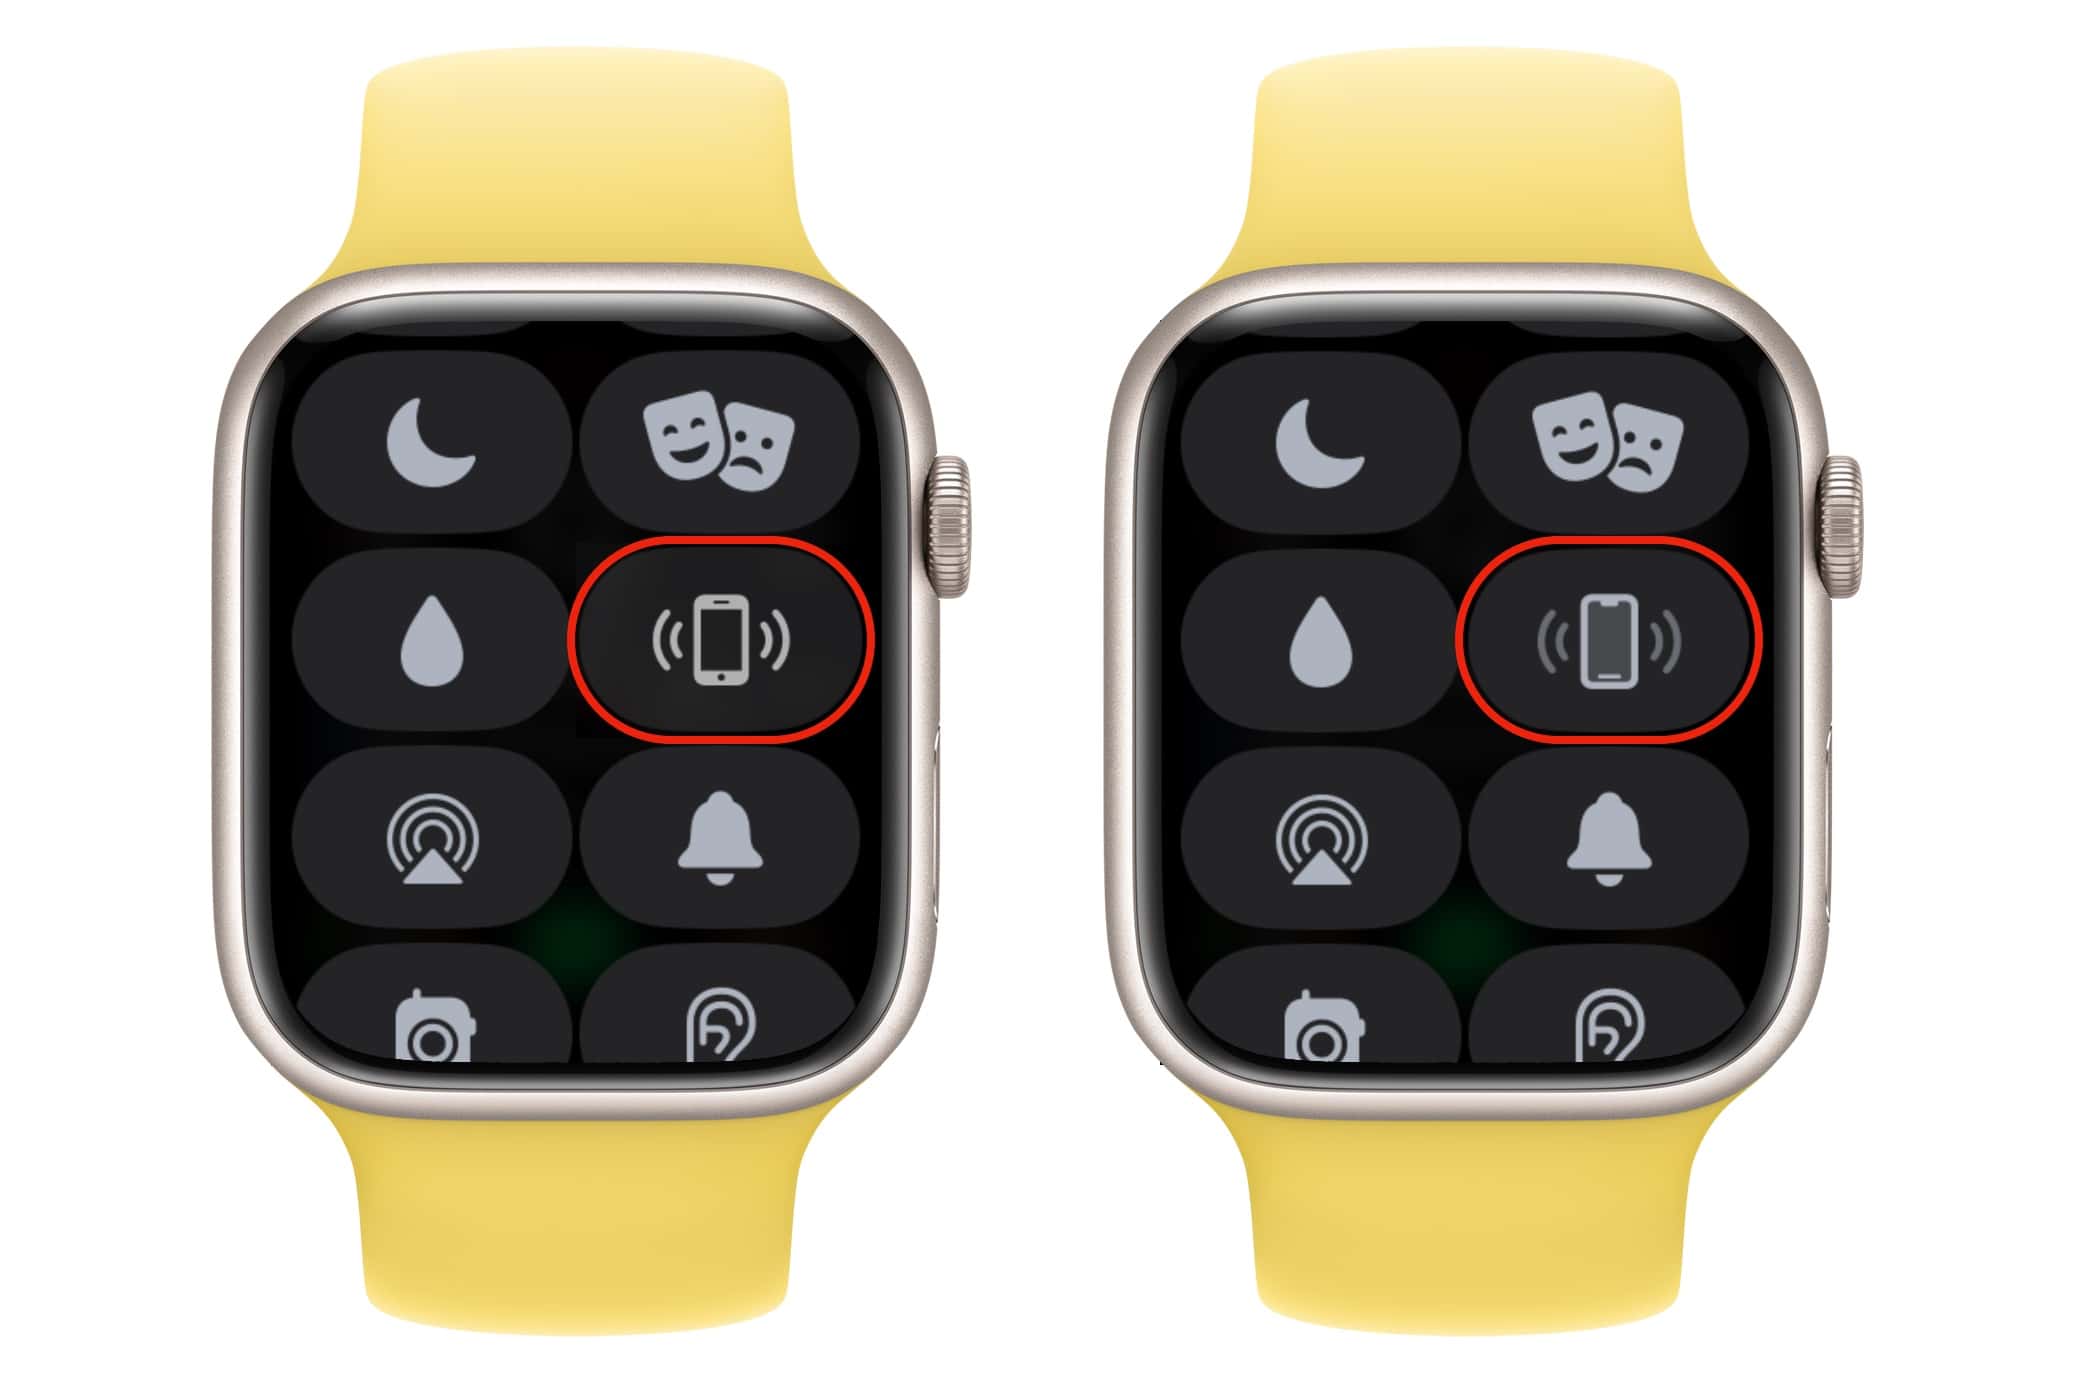 In the Apple Watch's Control Center, the phone symbol will vary depending on whether you have an iPhone with a Home button (left) or a full-screen iPhone (right). Your iPhone will make a pinging noise when you tap the button.